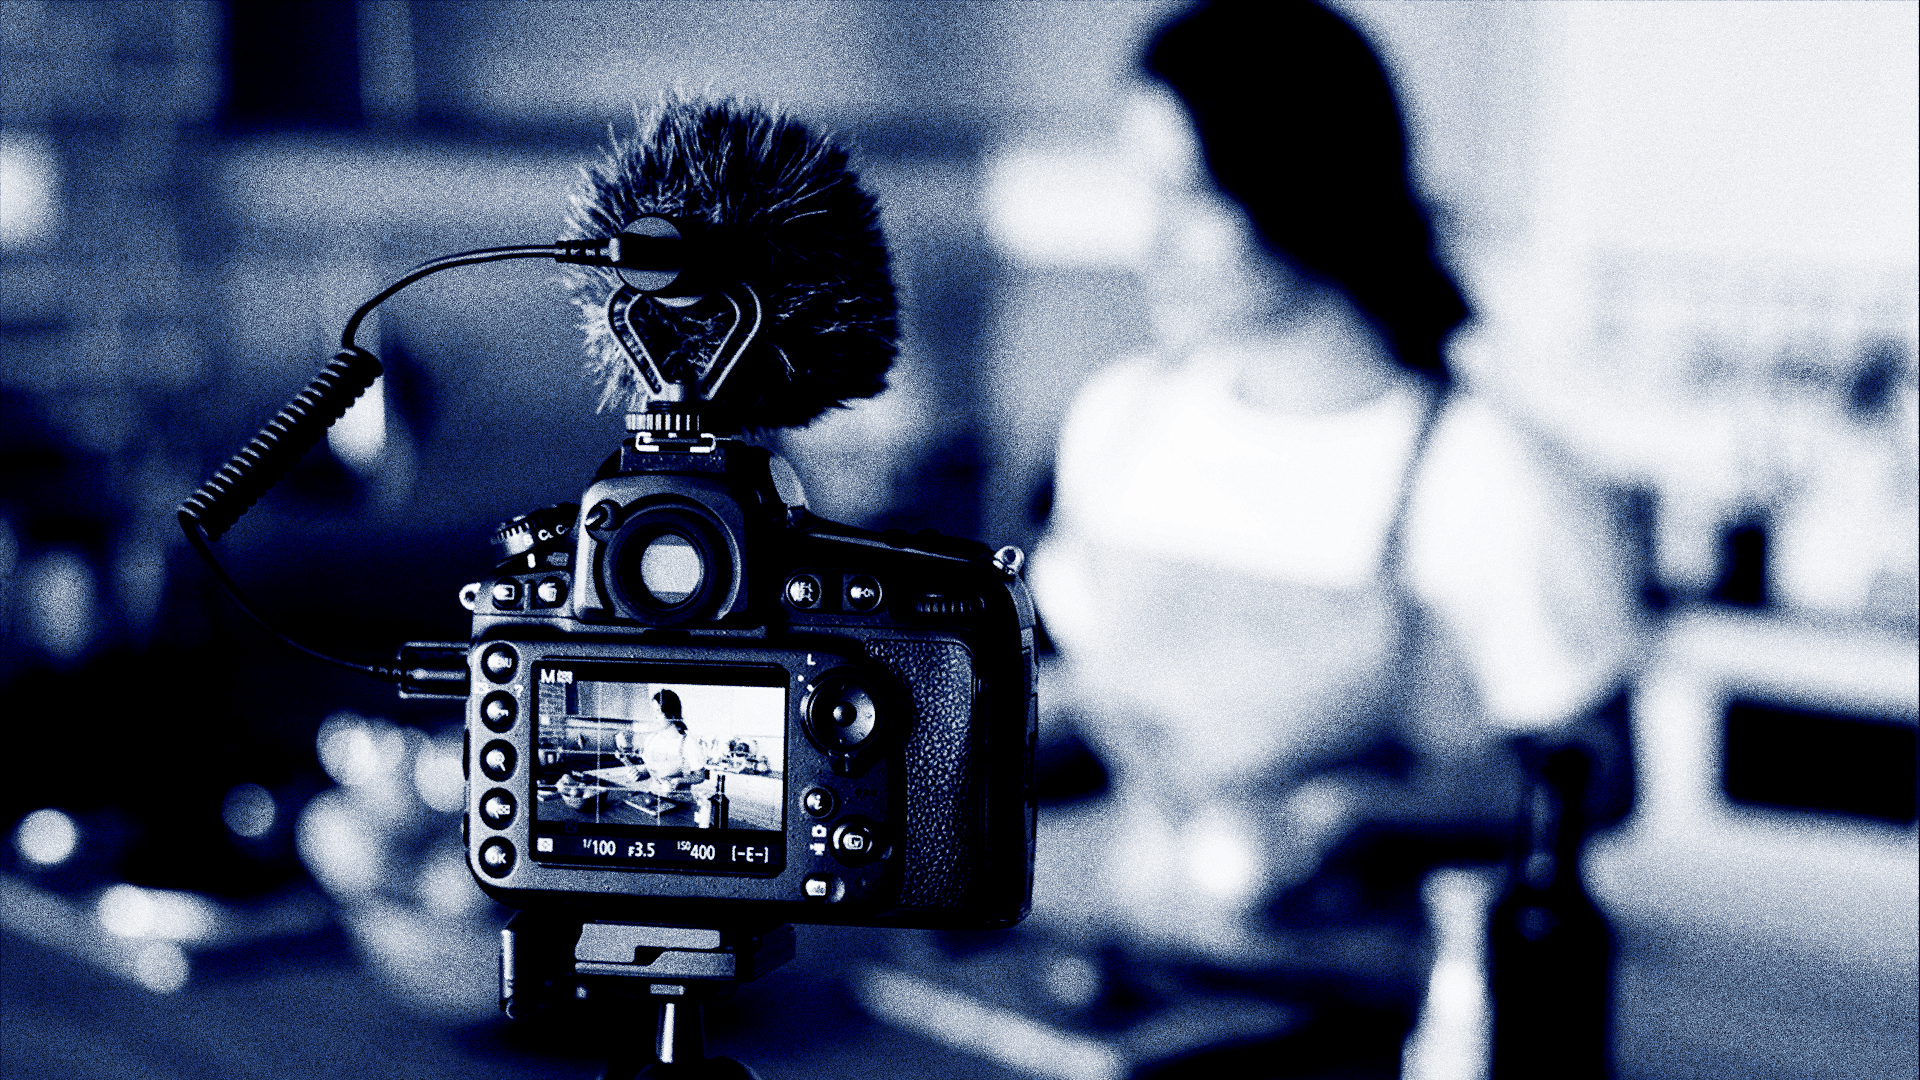 5 Pivotal Video Marketing Trends Brands Can't Afford to Ignore